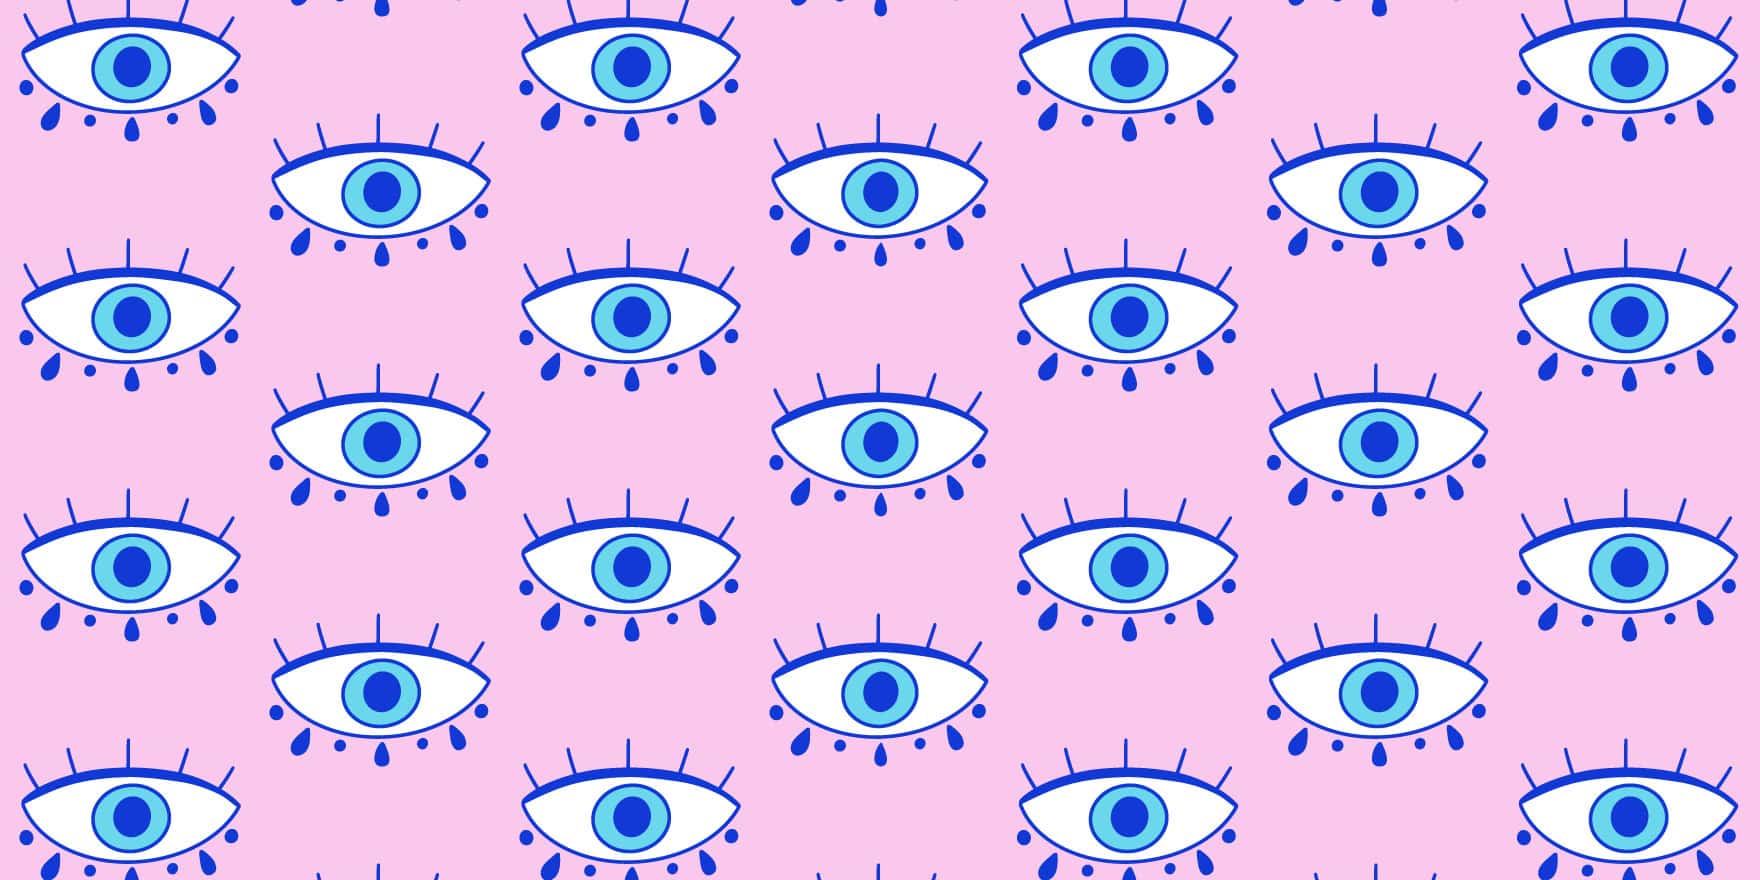 A pink background with repetitive blue evil eye illustrations in a pattern